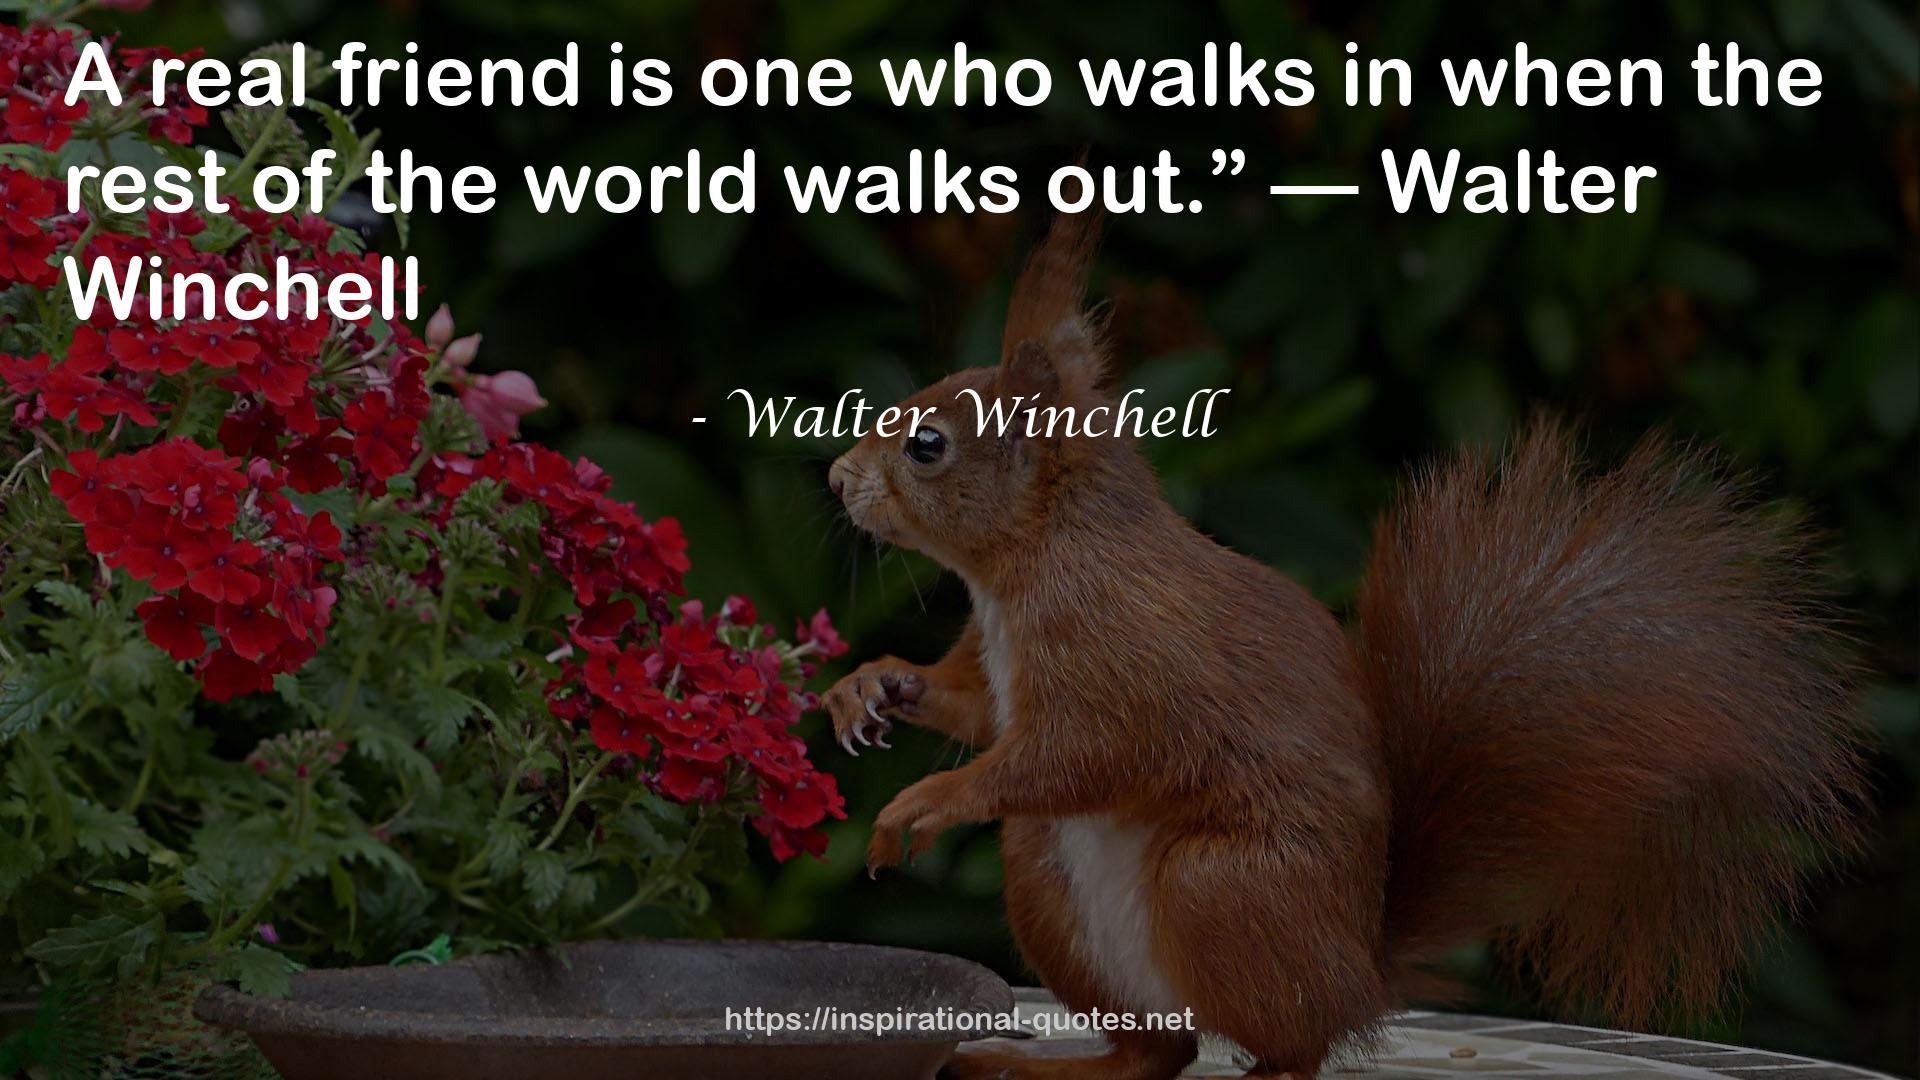 Walter Winchell QUOTES